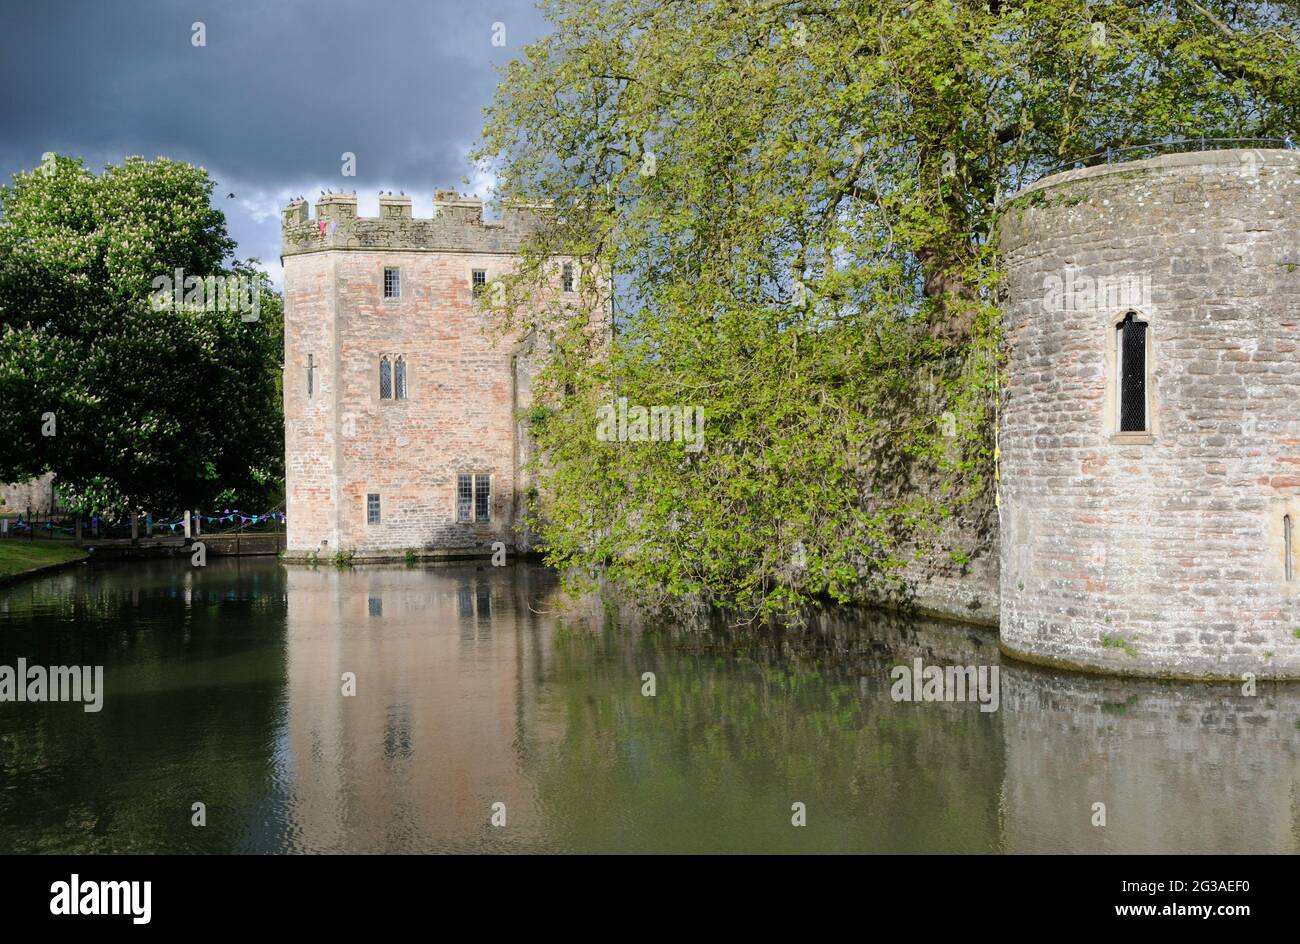 The gatehouse and part of the walls of the moated Bishop's Palace in Wells, Somerset, England Stock Photo